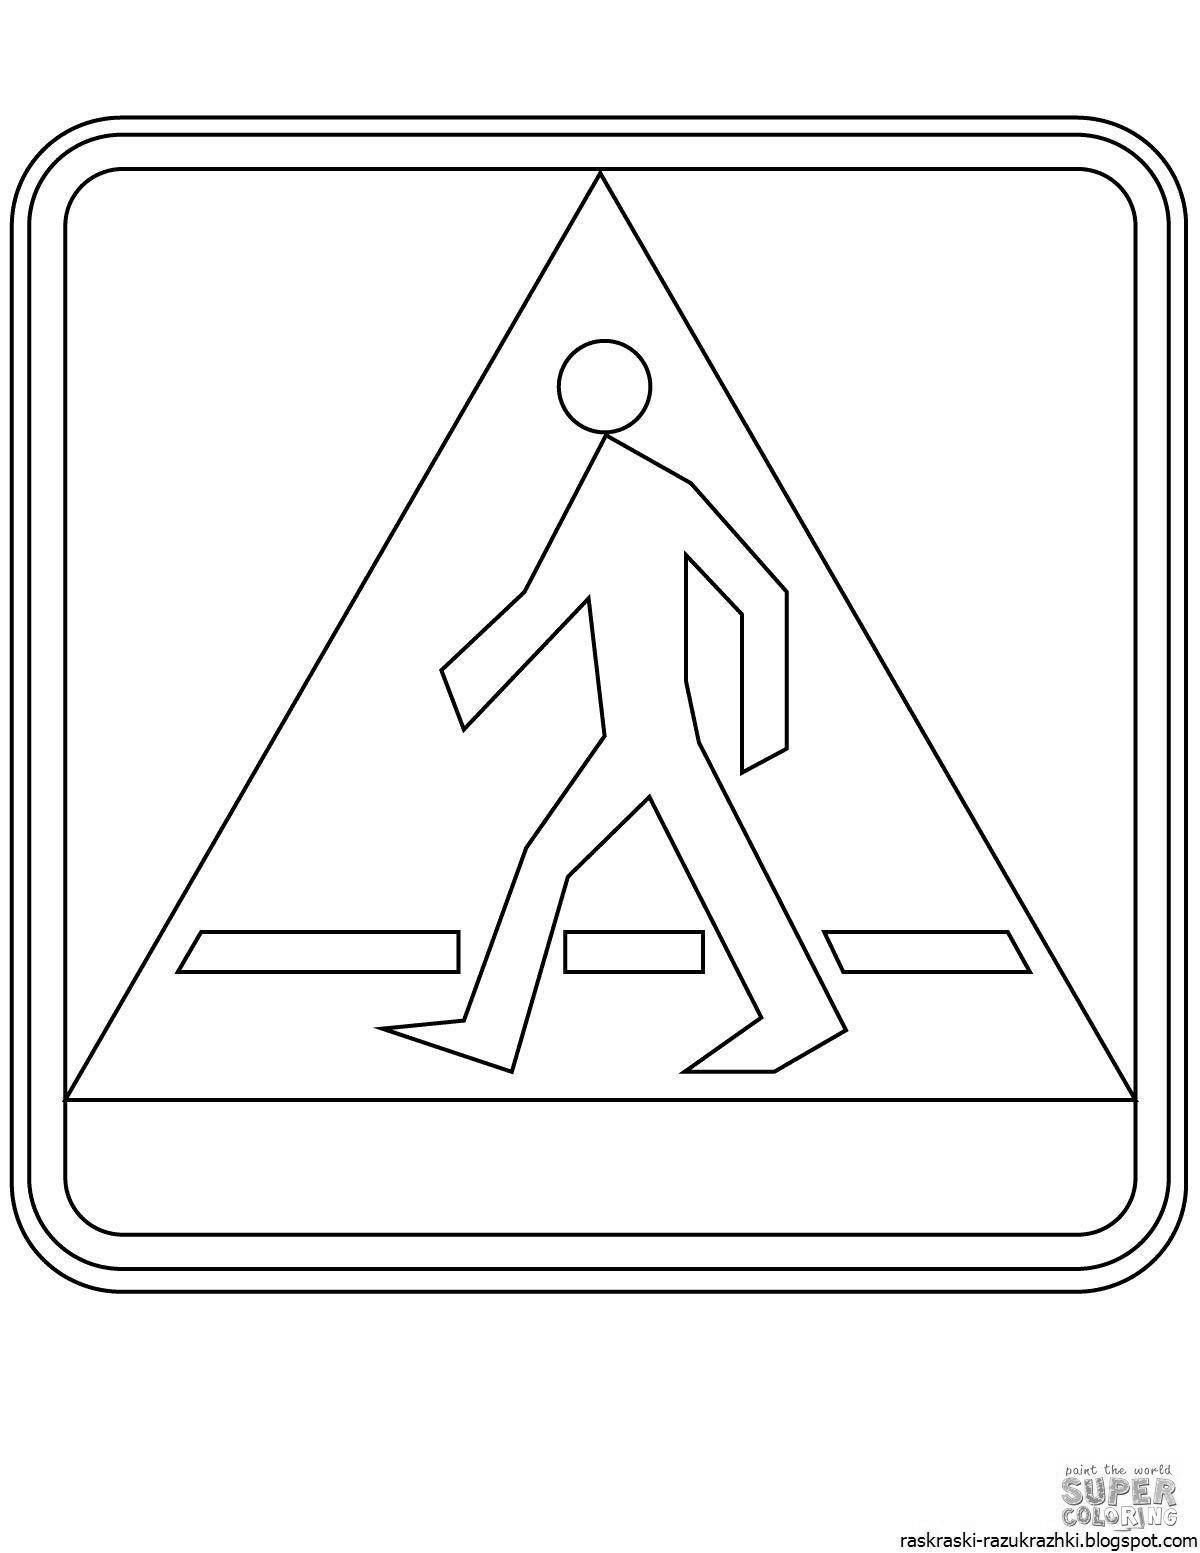 Exciting underpass sign coloring page